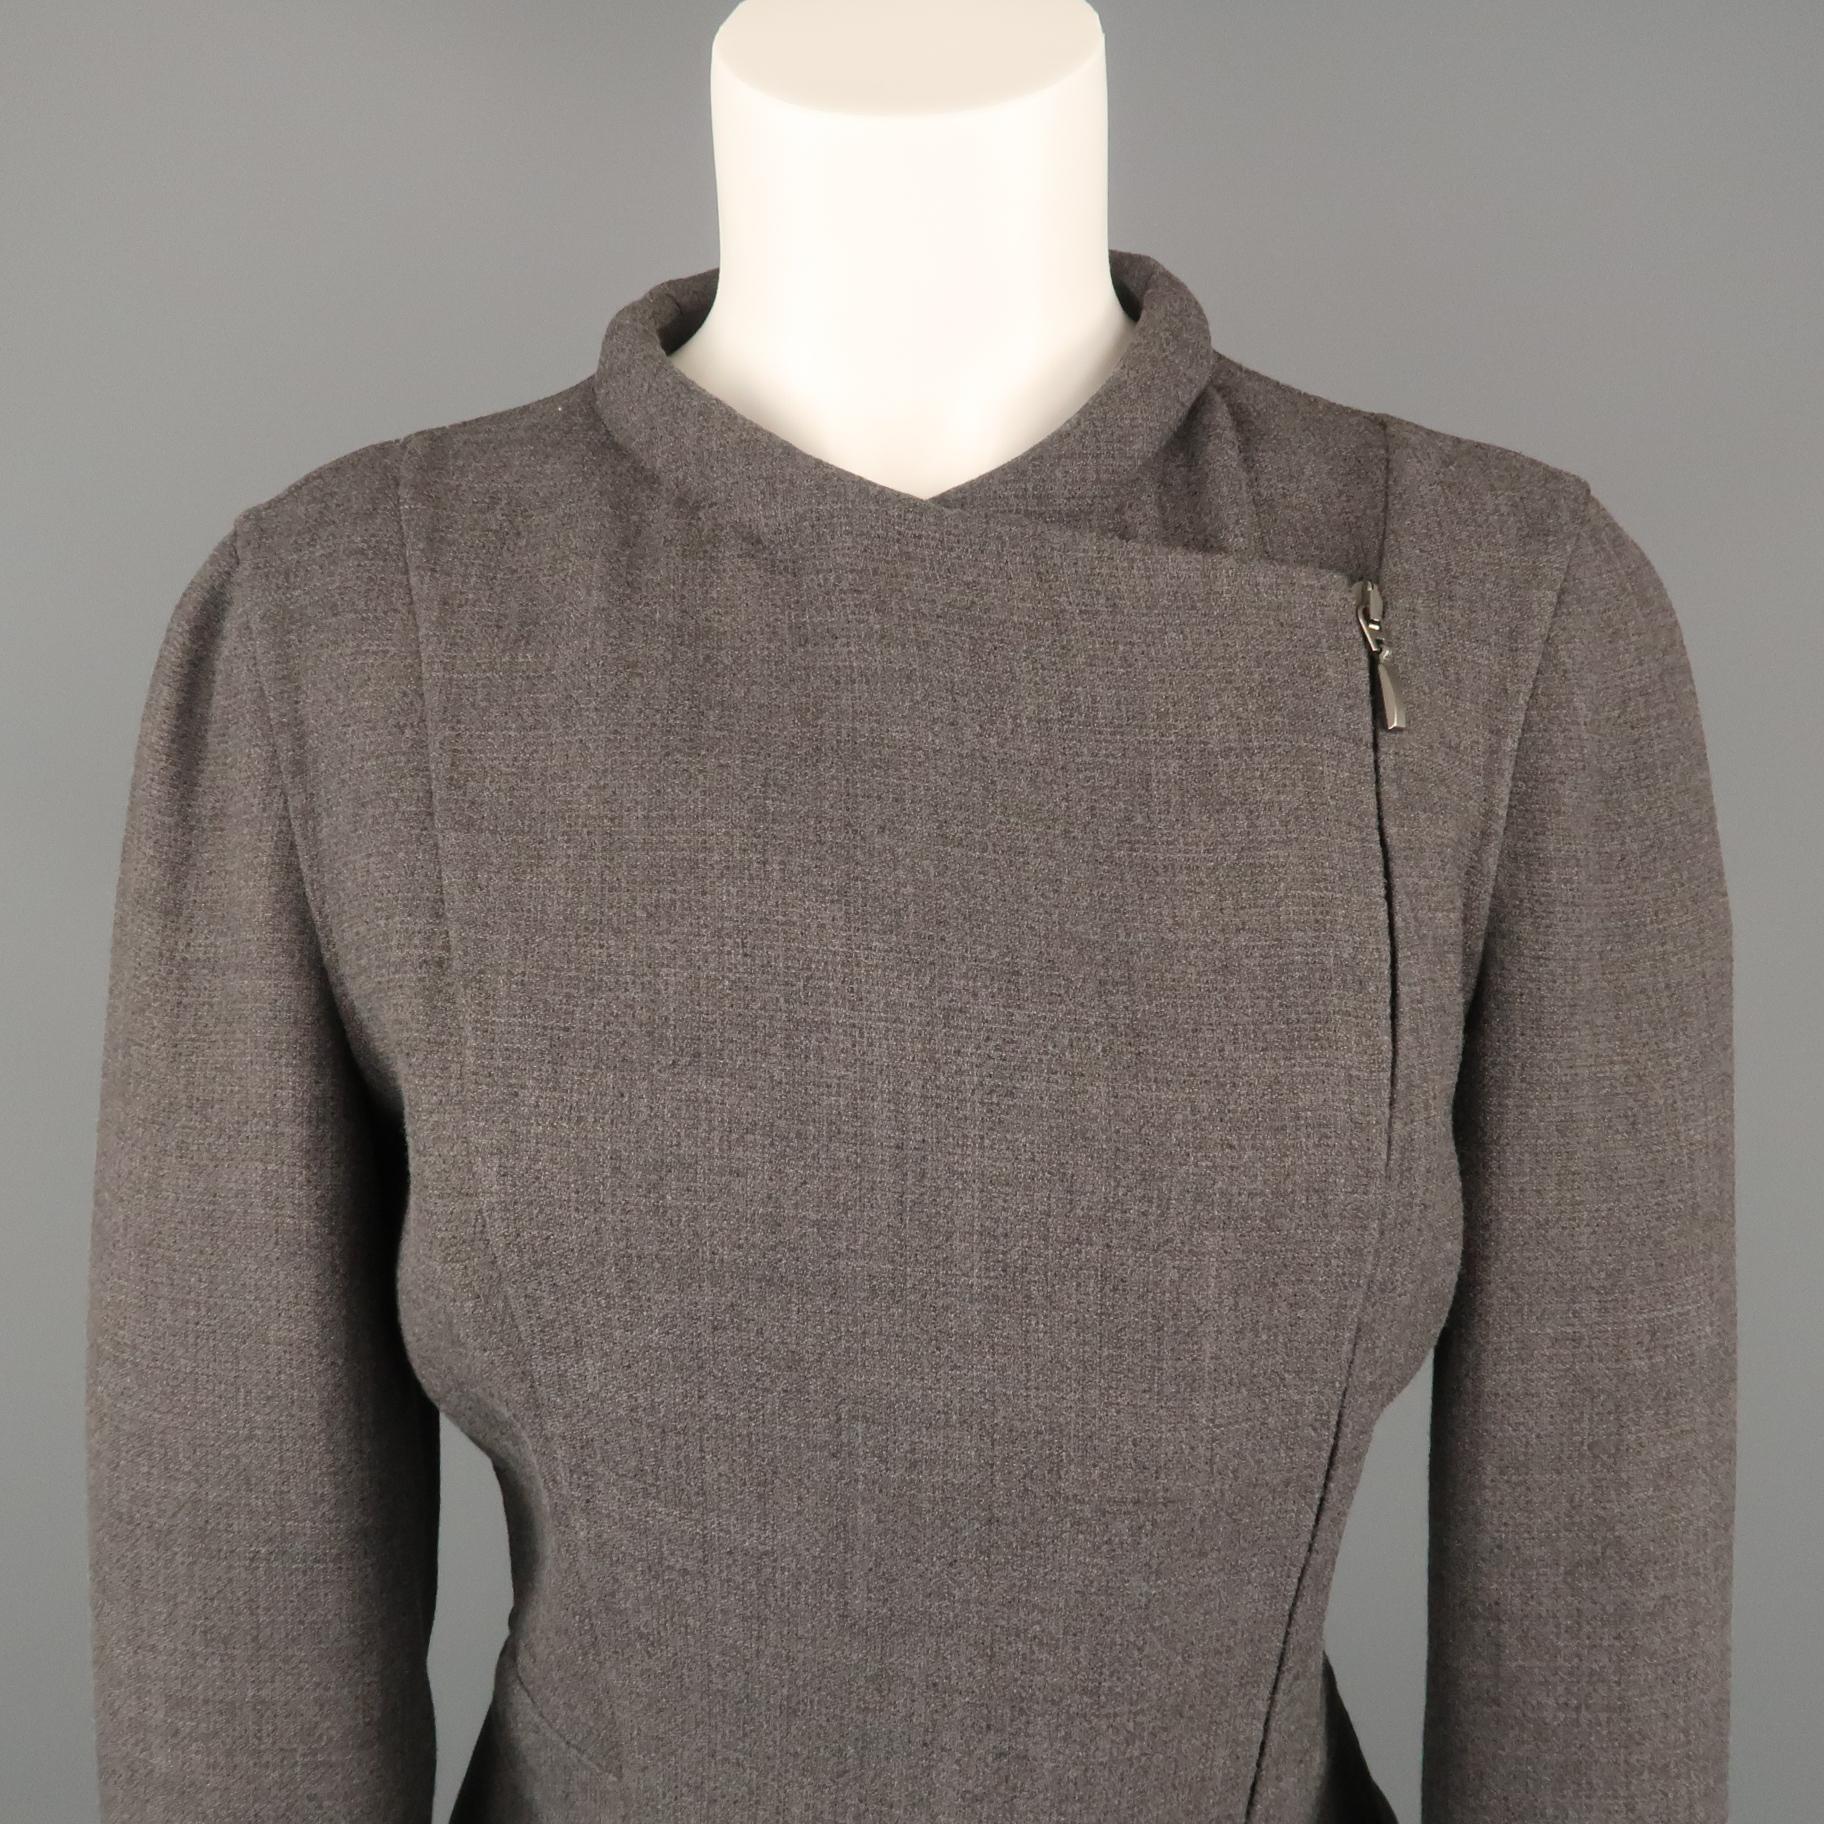 CALVIN KLEIN COLLECTION jacket comes in heather gray wool blend fabric with a round collarless neckline, long sleeves, and an asymmetrical double breasted zip closure front. Made in Italy.
 
Excellent Pre-Owned Condition.
Marked: 8 / 44
